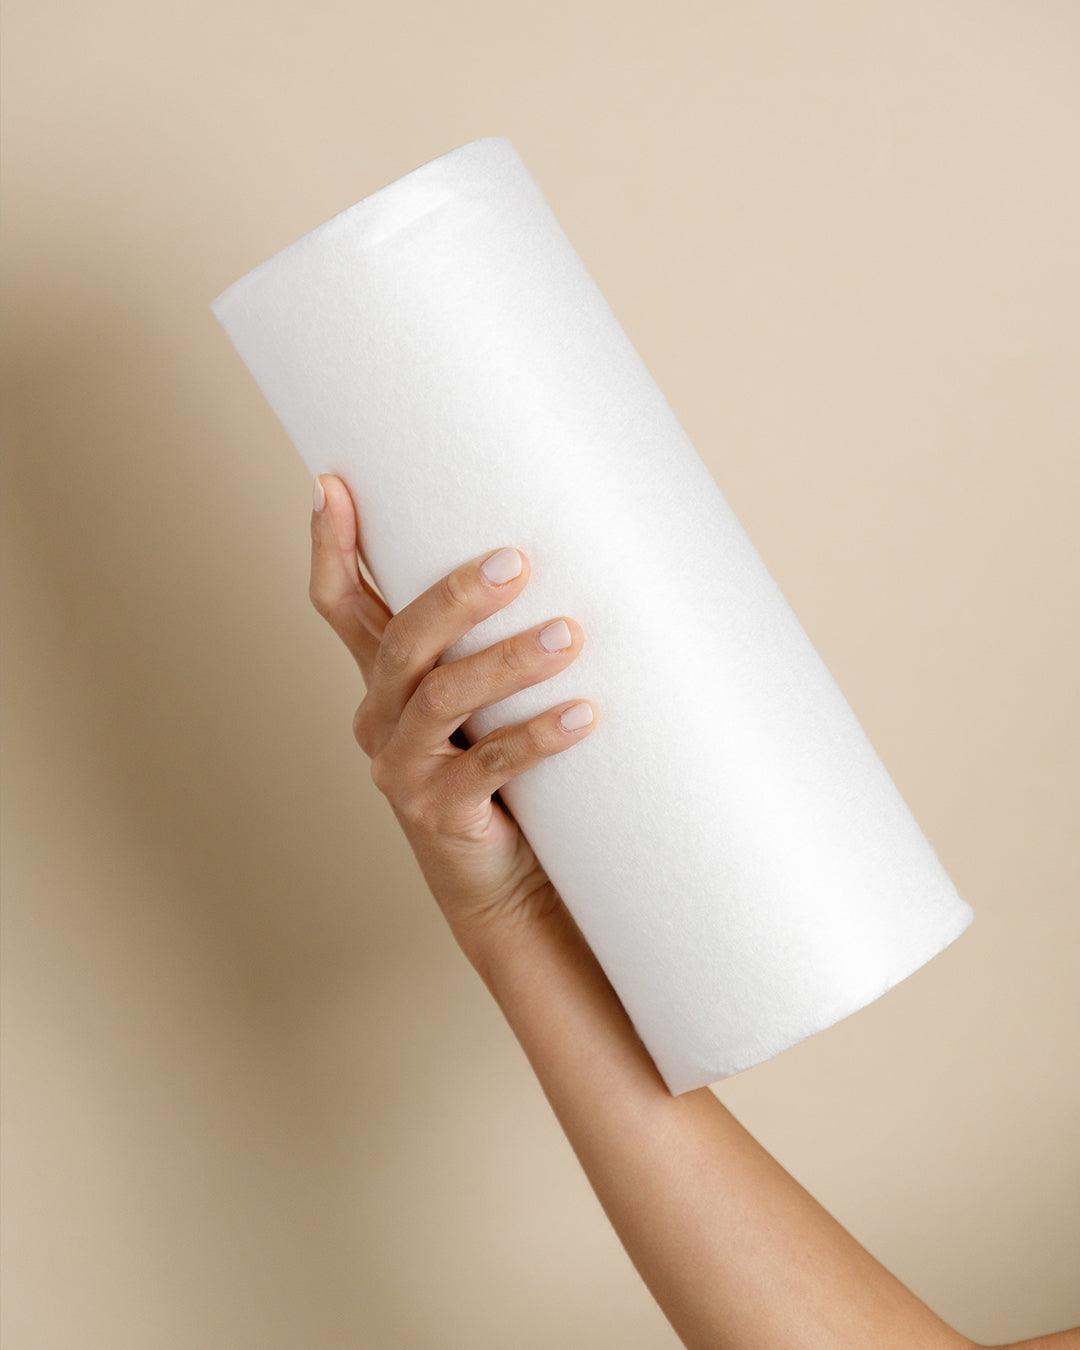 How Reusable Bamboo Paper Towels Transform Your Kitchen